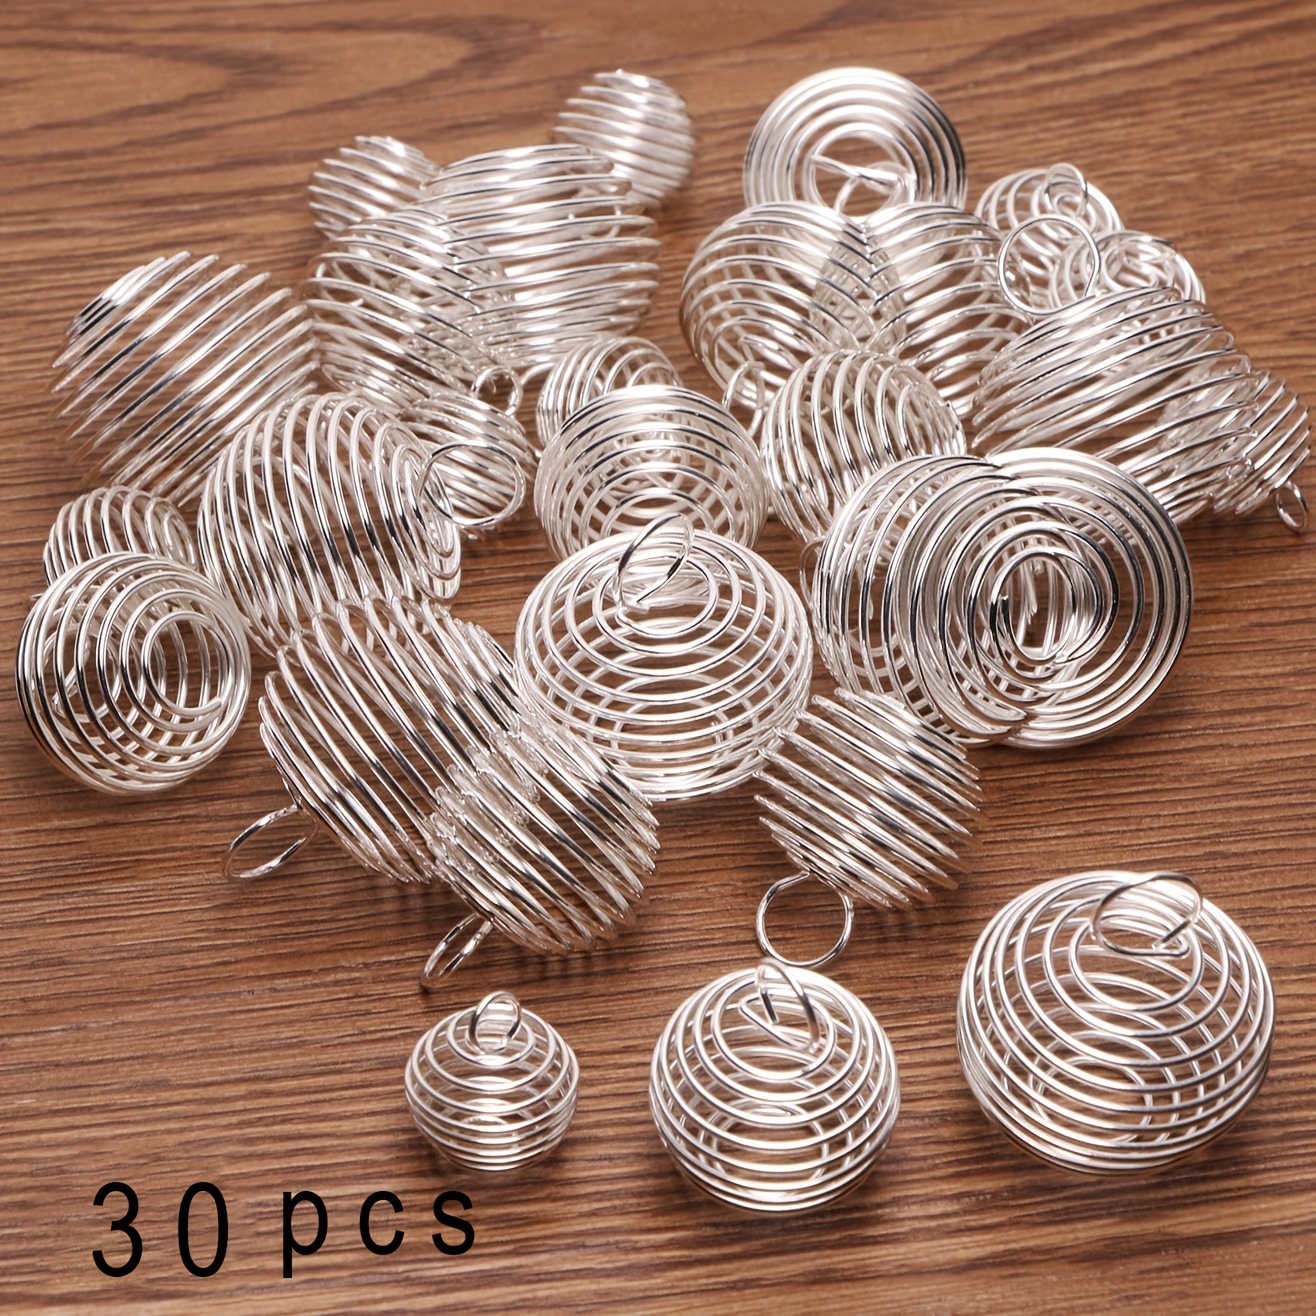 Crimp Beads for Jewelry Making Crimp Covers Brass Tube Crimp Beads for DIY Jewelry  Bracelets Necklaces Making 2100 Pcs 